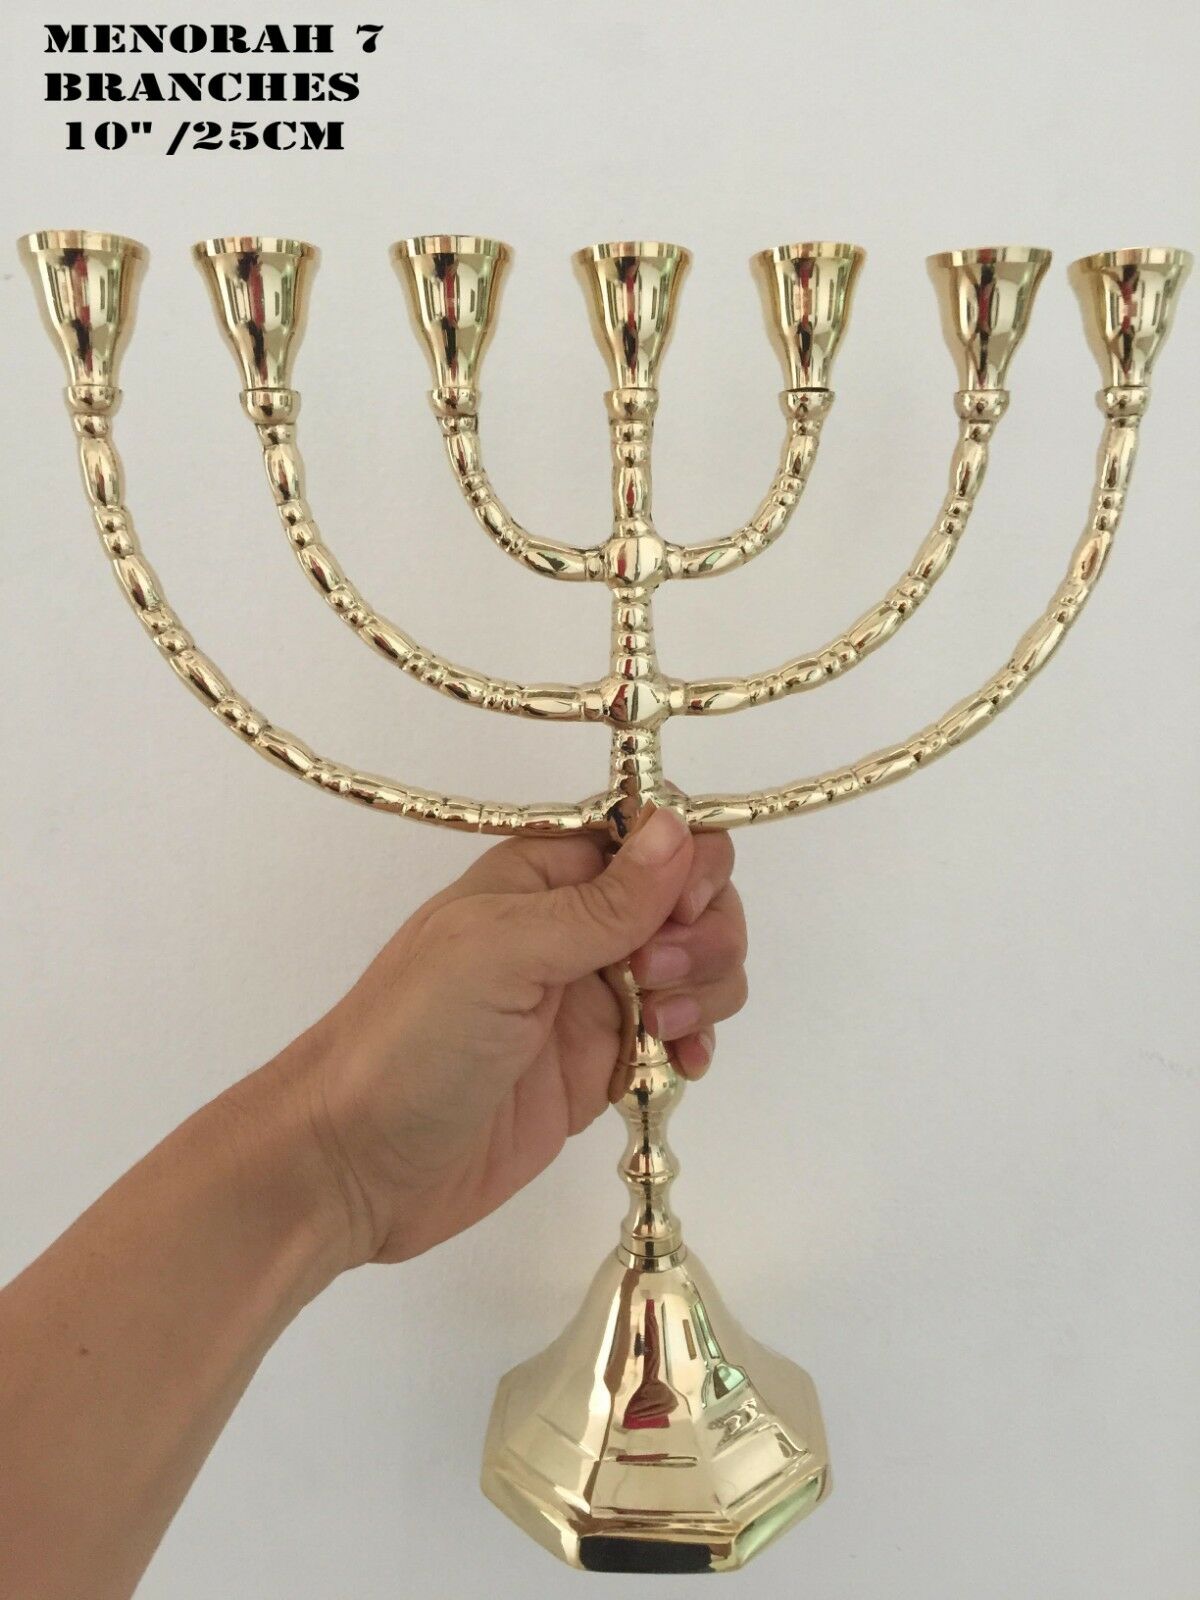 Amazing Classic Gold Plated Jewish Menorah 7 Branches 10" /25cm Painted Candle